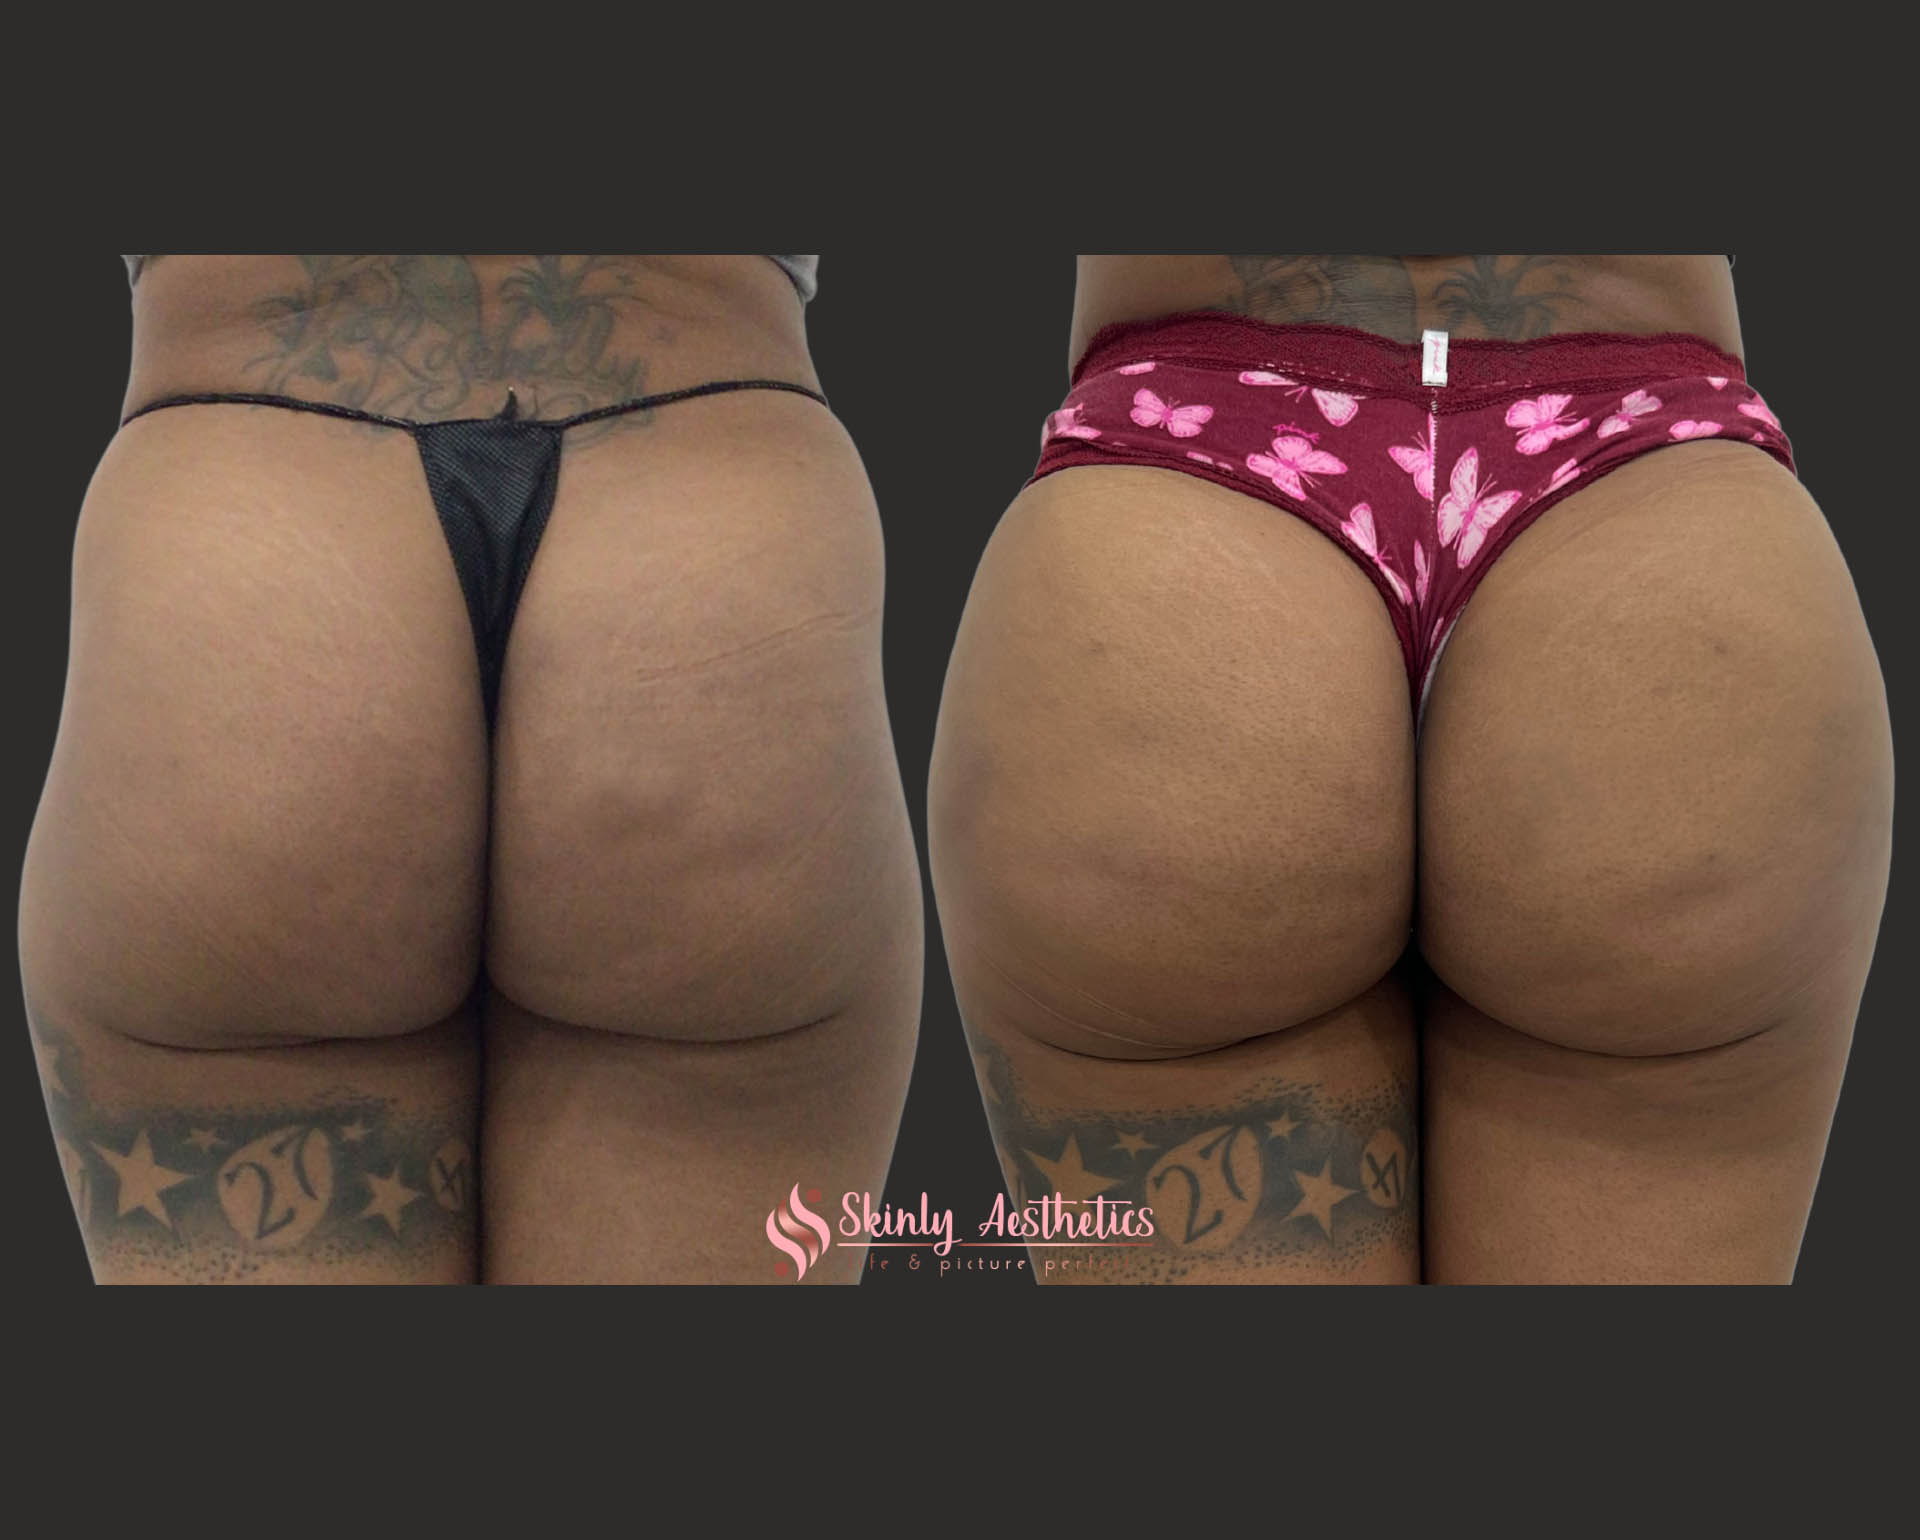 Before and after results following 12 vials of Sculptra butt injections